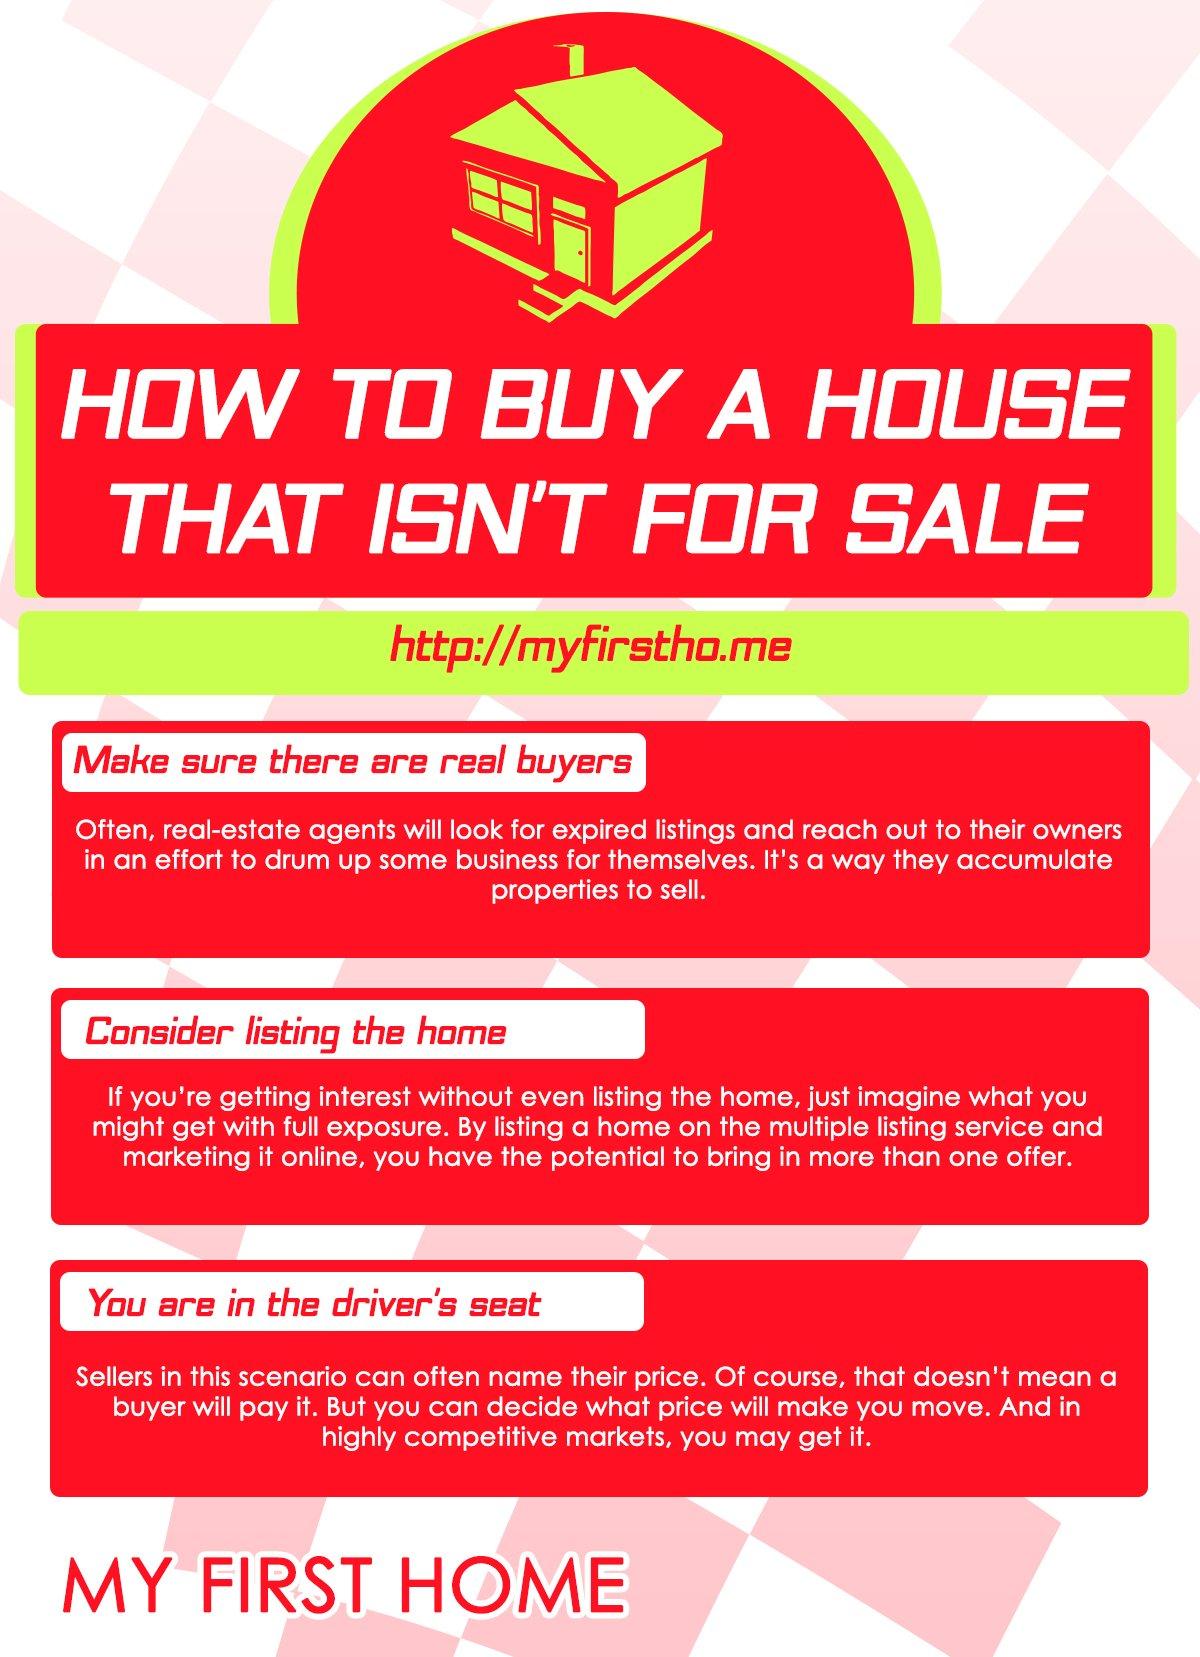 How to buy a house that isn’t for sale